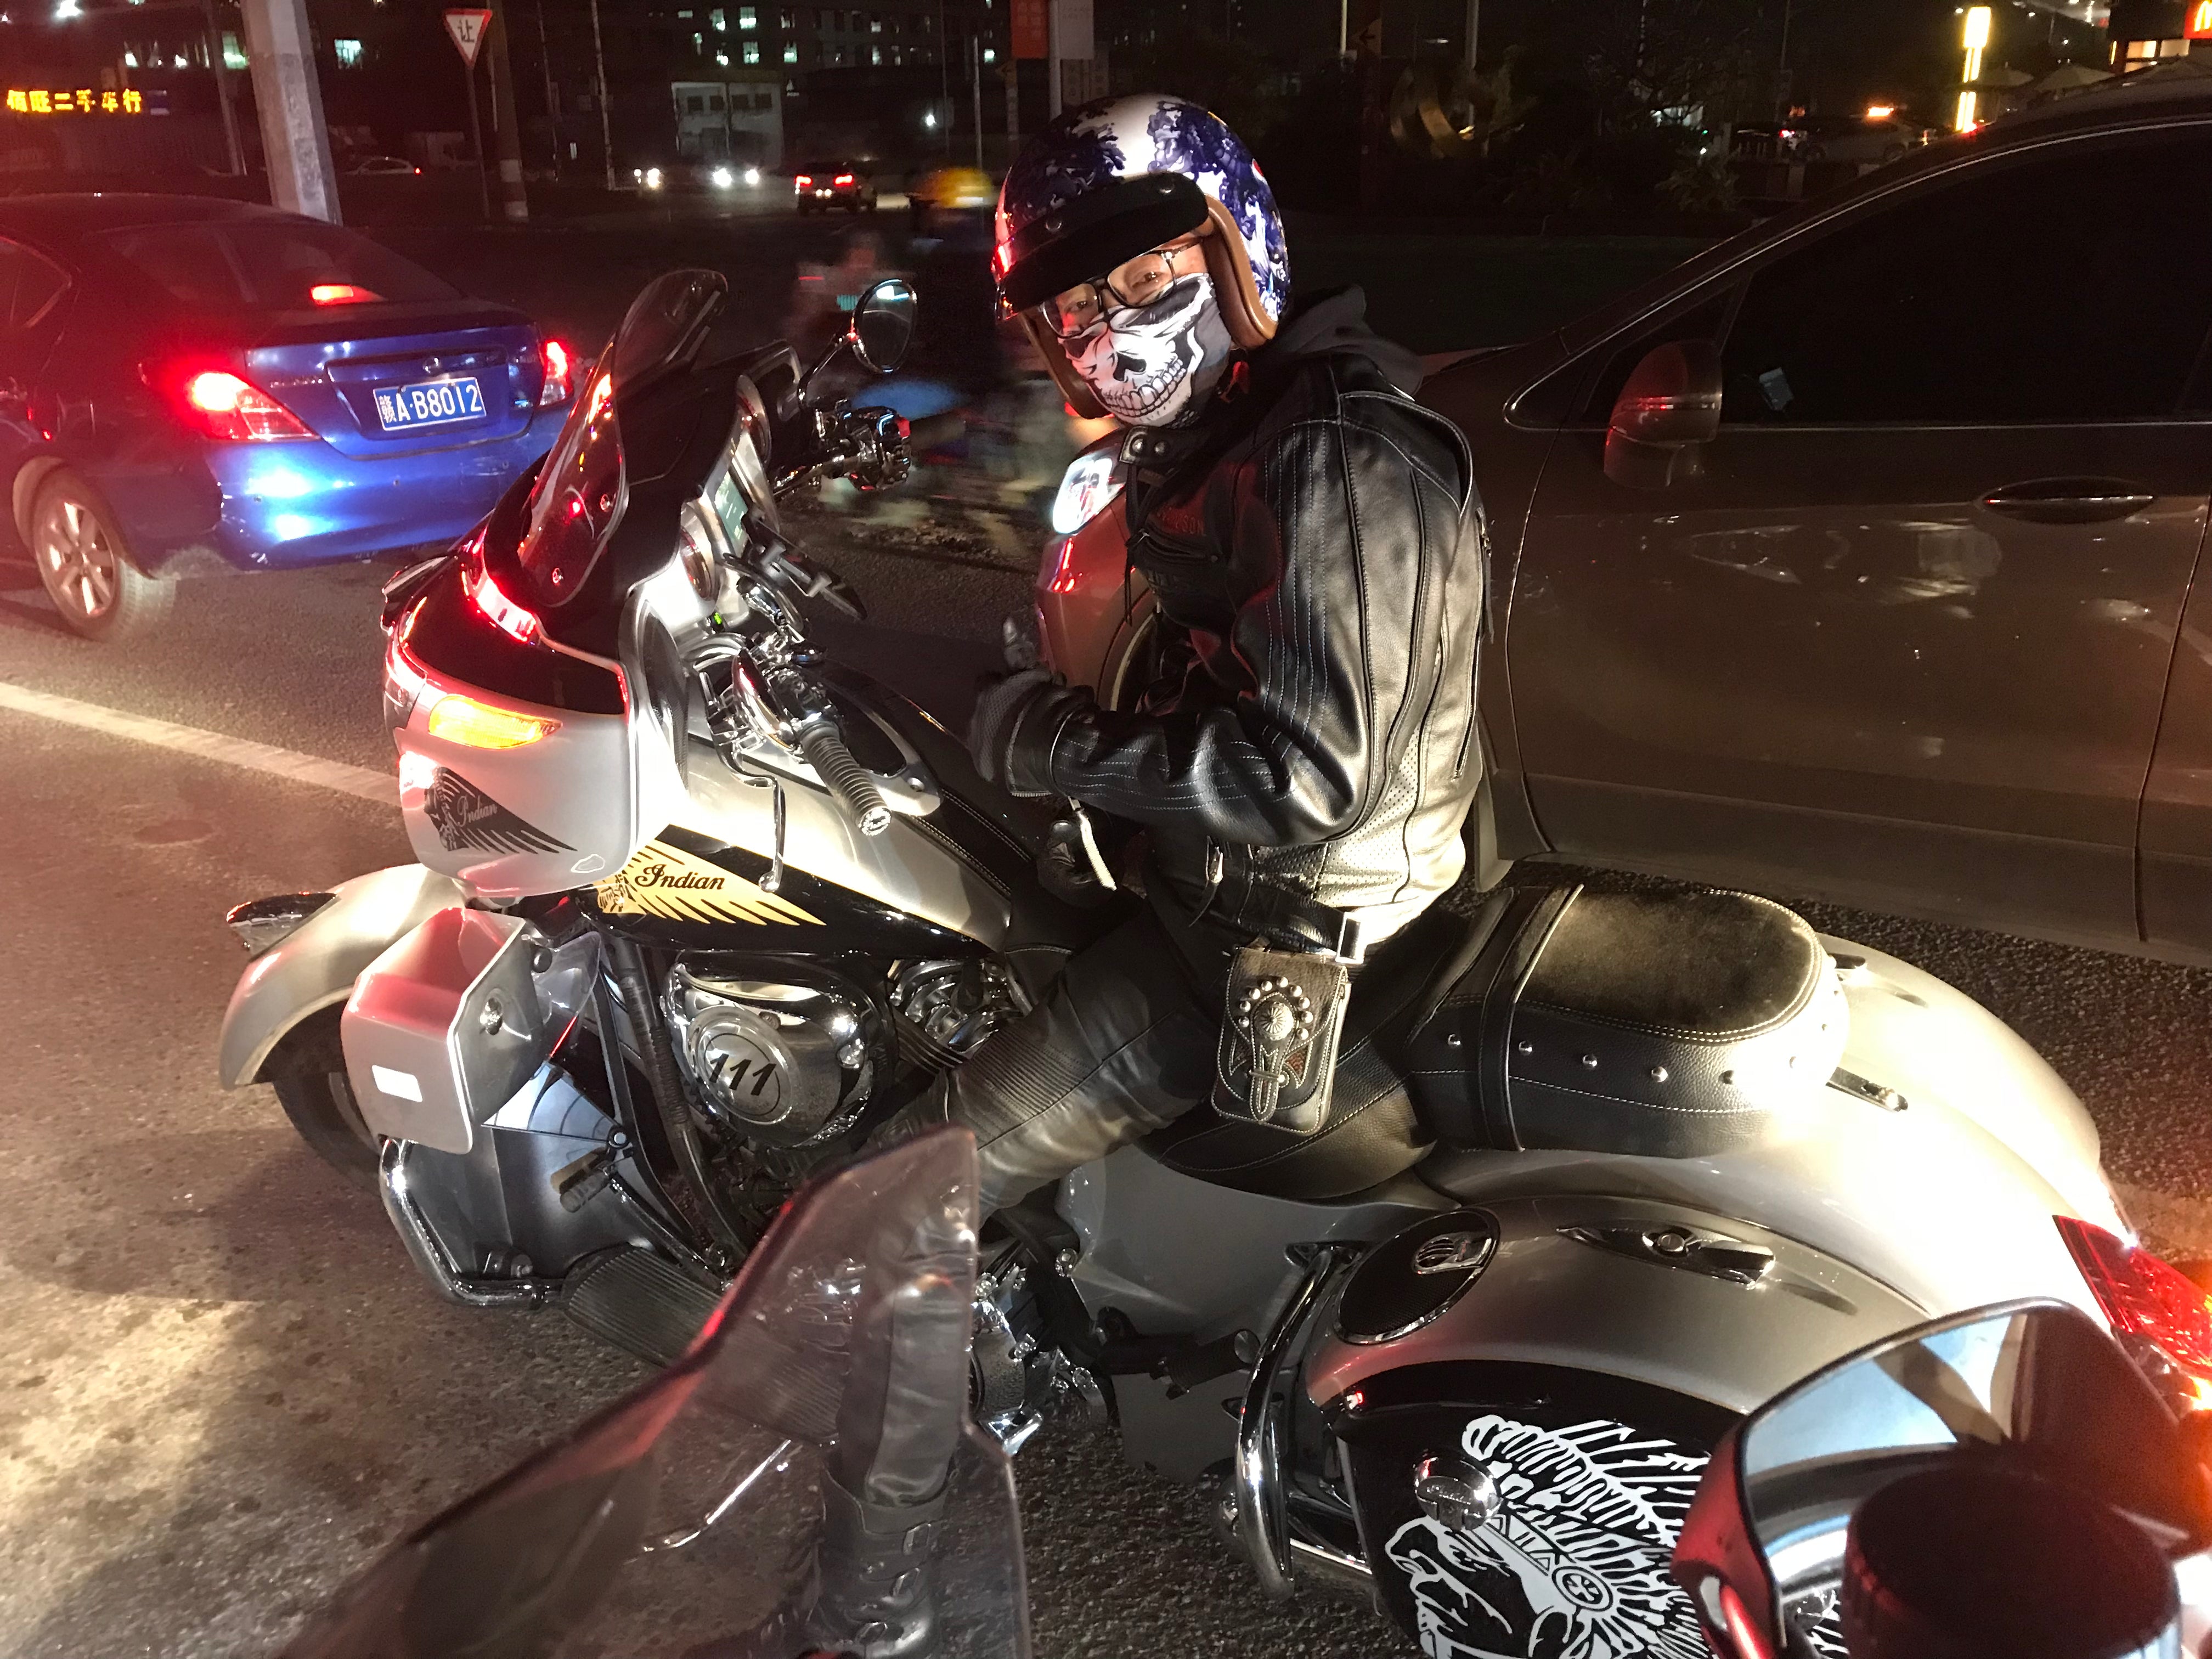 Riding Safe at Night: Essential Tips for Motorcycle Club Members